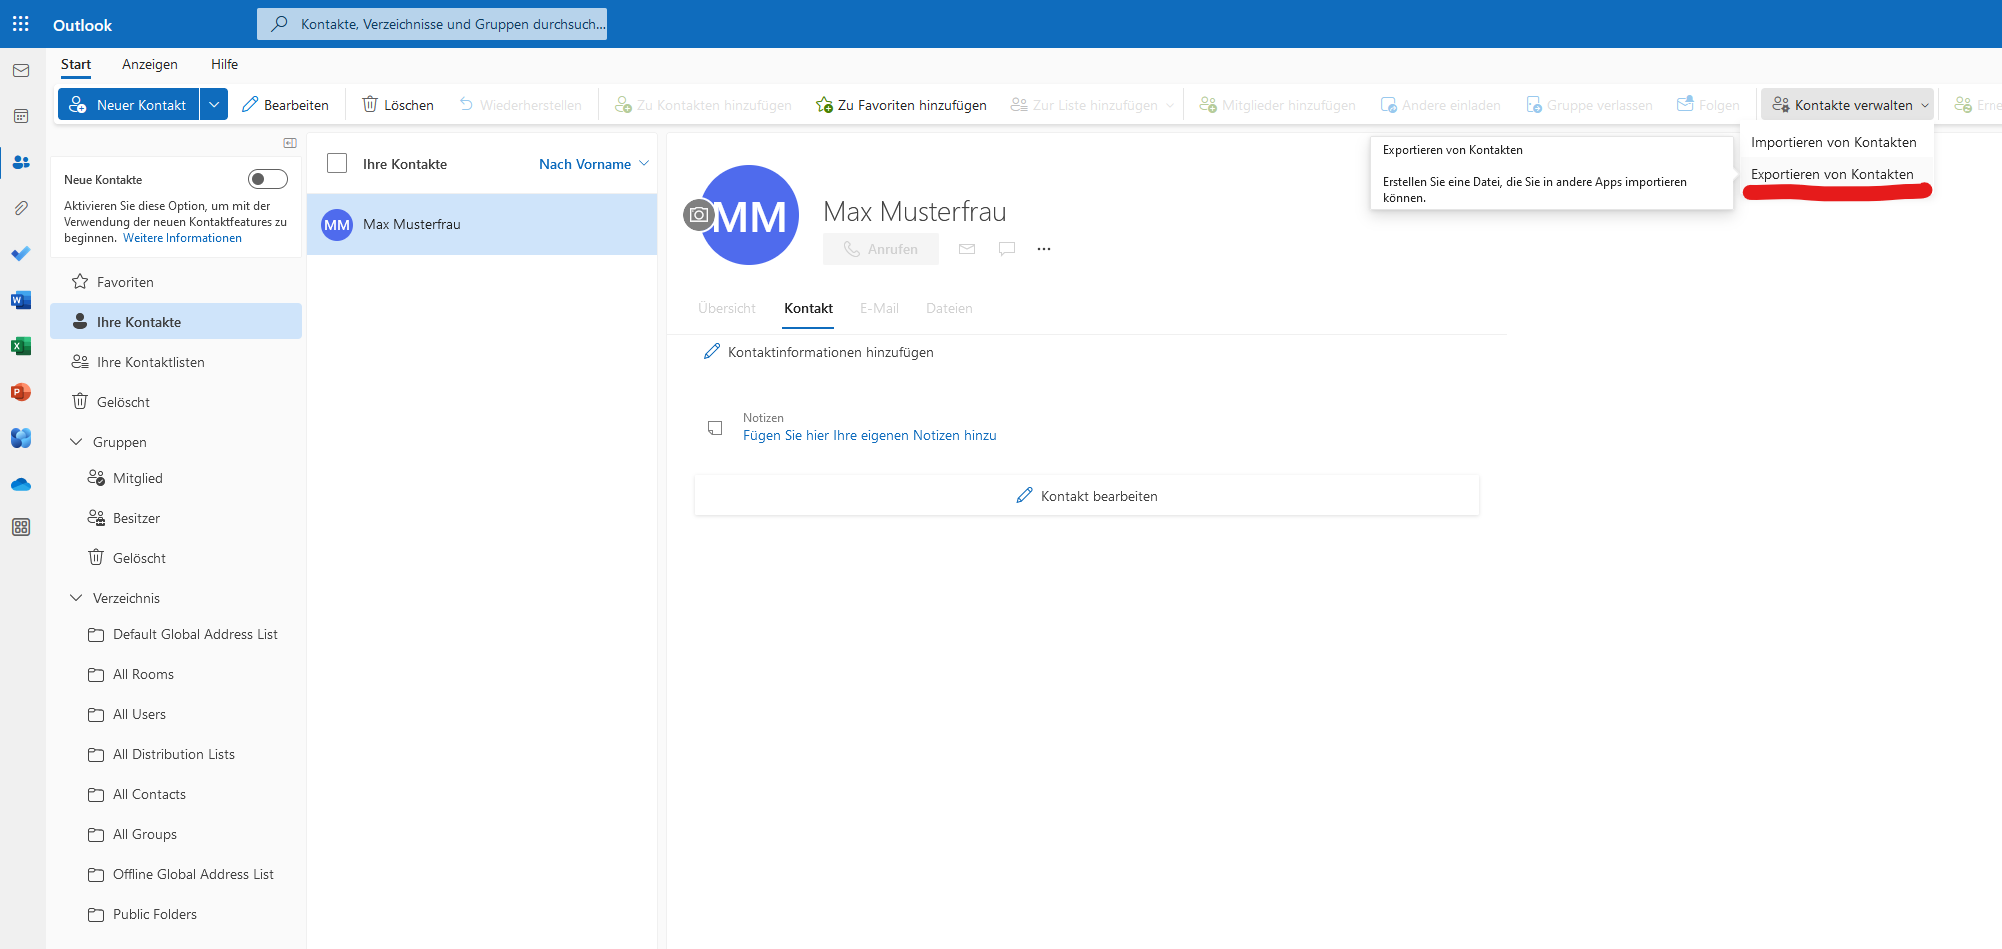 Manage and export contacts in Outlook Online